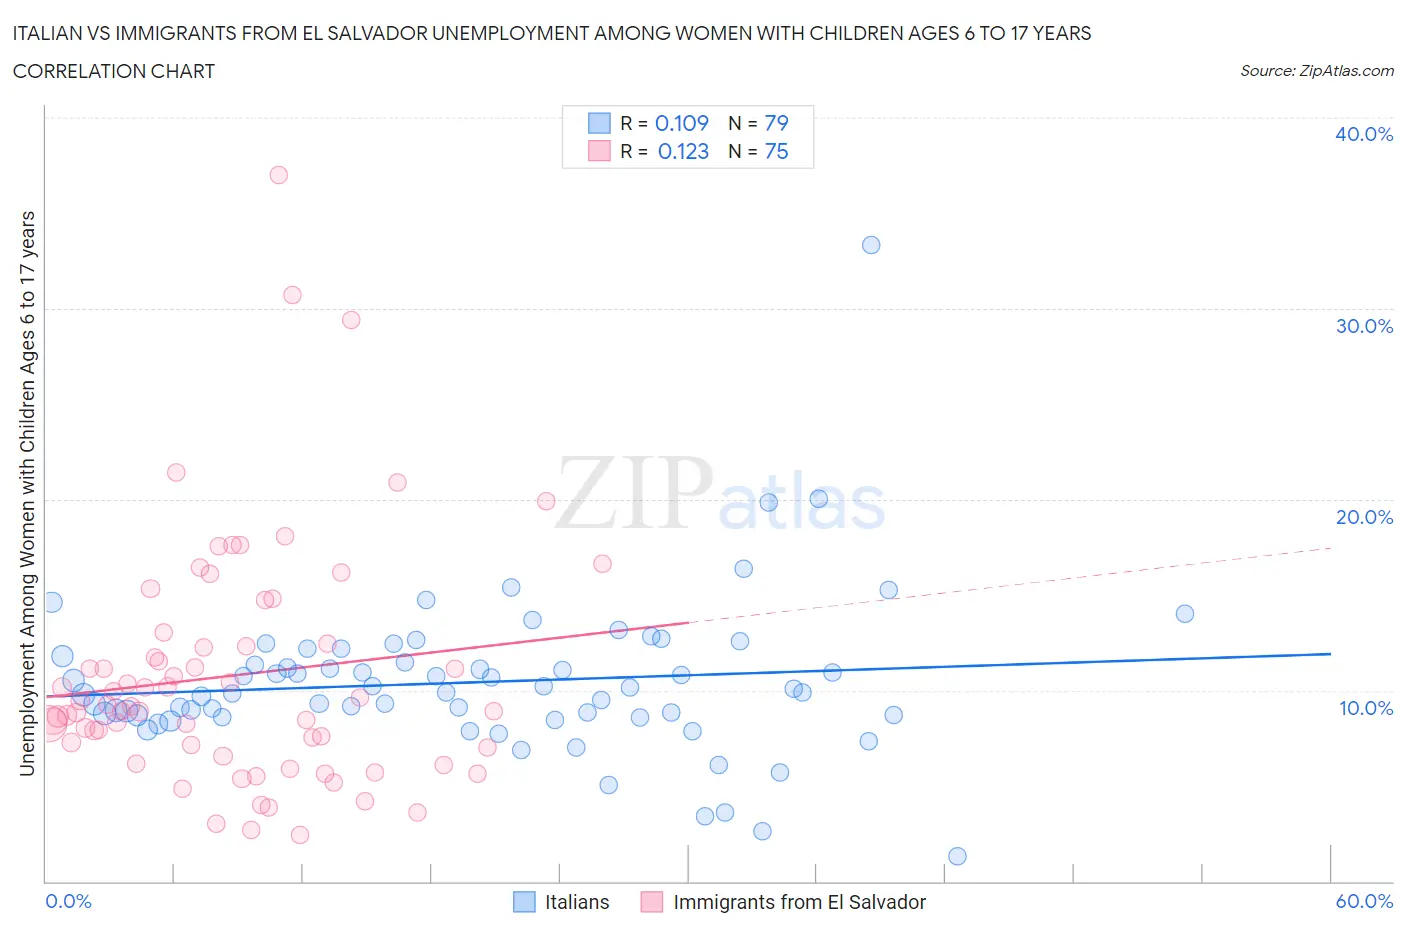 Italian vs Immigrants from El Salvador Unemployment Among Women with Children Ages 6 to 17 years